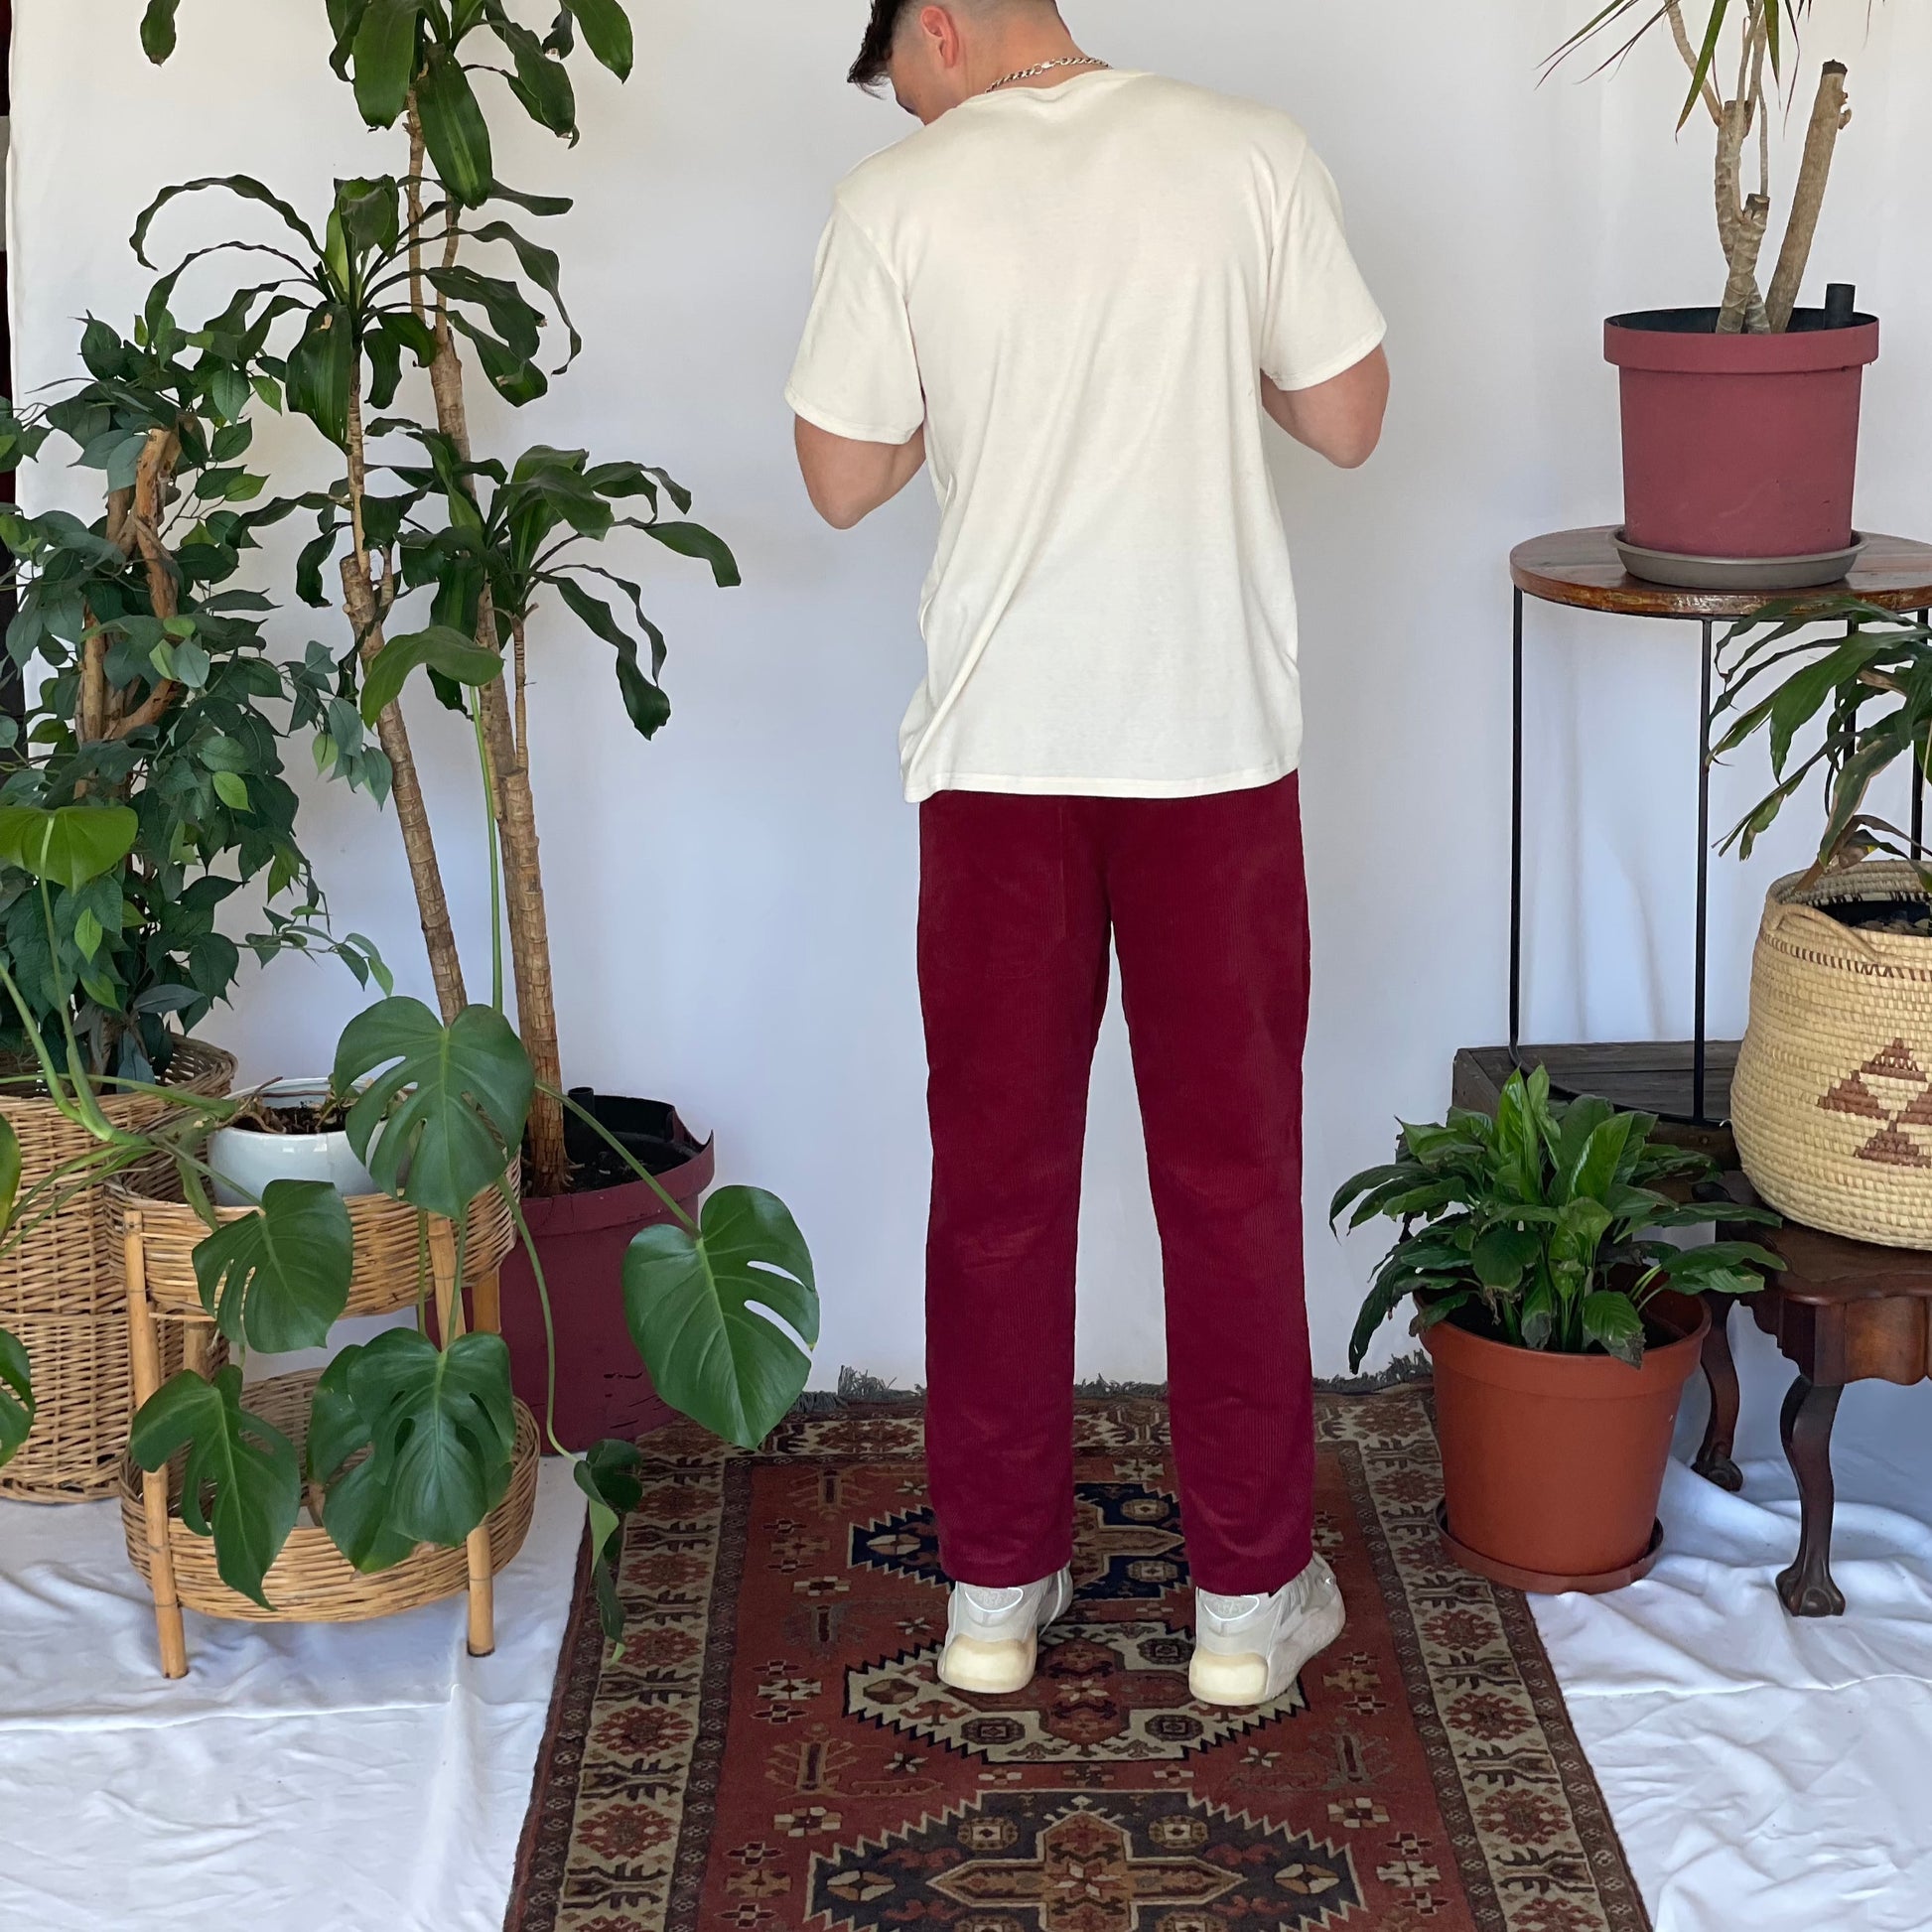 Model wears a cream t-shirt with burgundy corduroy pants and sneakers with their back to the camera. The model is standing on a narrow carpet against a white backdrop with plants and hanging foliage. 